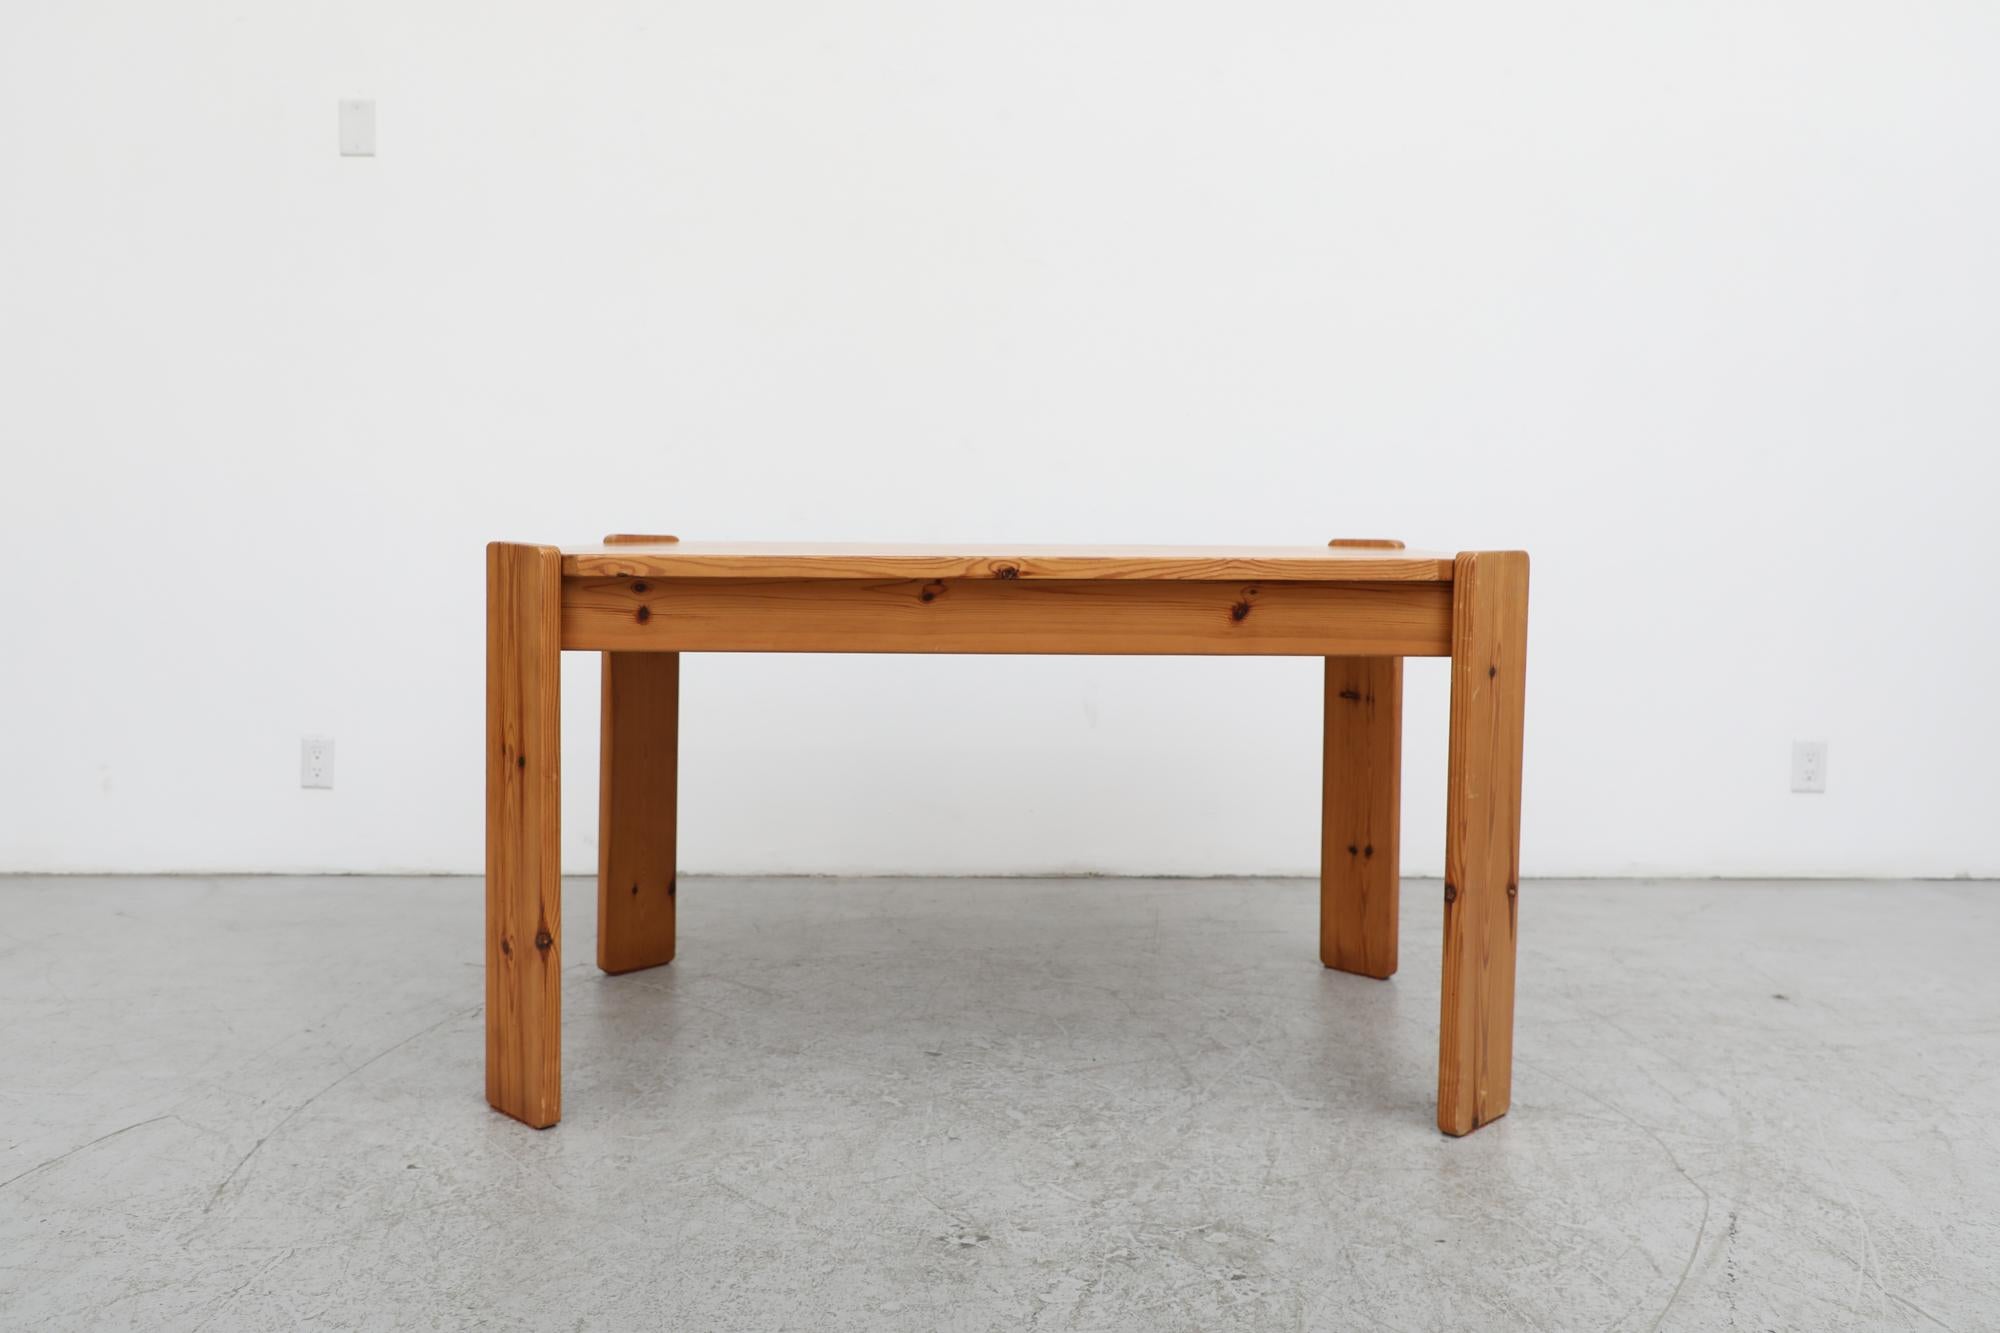 Mid-Century Ate Van Apeldoorn attributed pine wood Dining table with clipped corners and angled slat legs. In original condition with moderate wear and scratching consistent with its age and use. Another similar table is available and listed